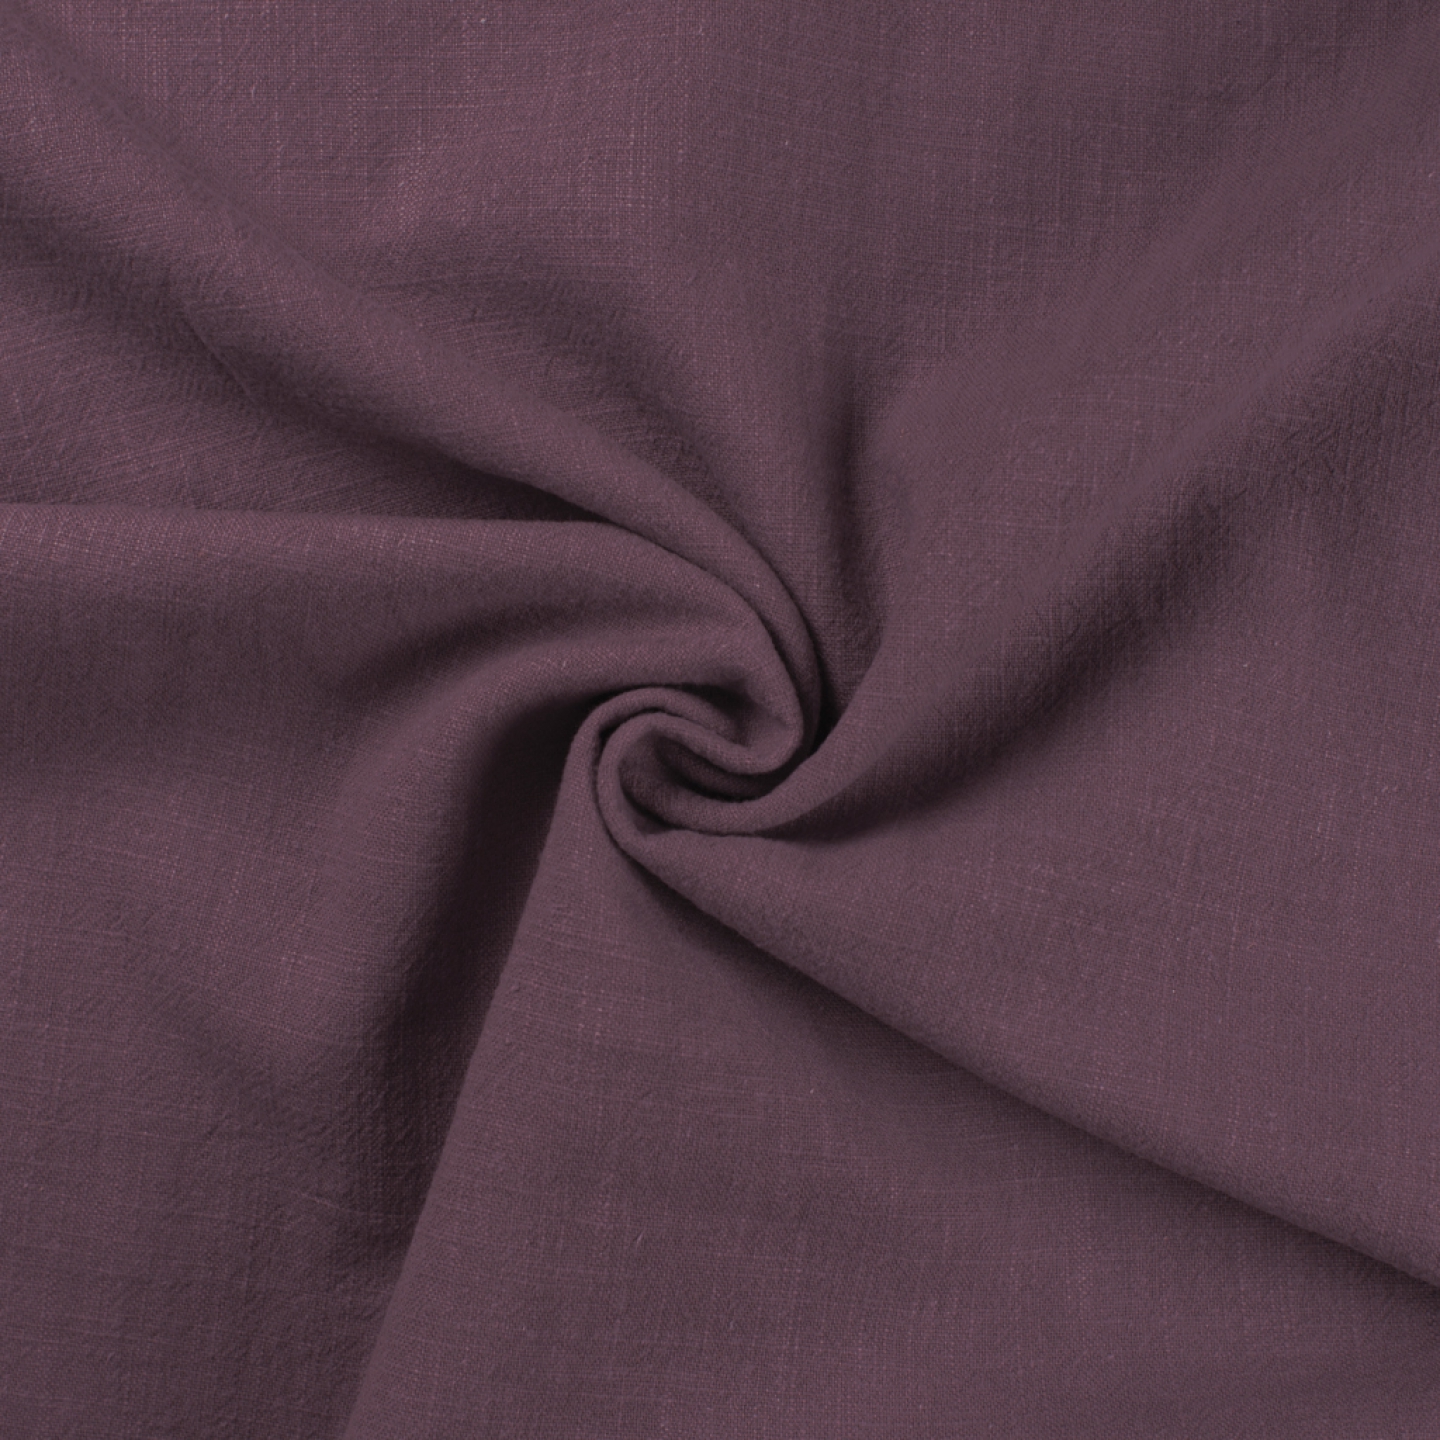 REMNANT - 0.70m -  Stone Washed Linen Fabric in Mauve Purple